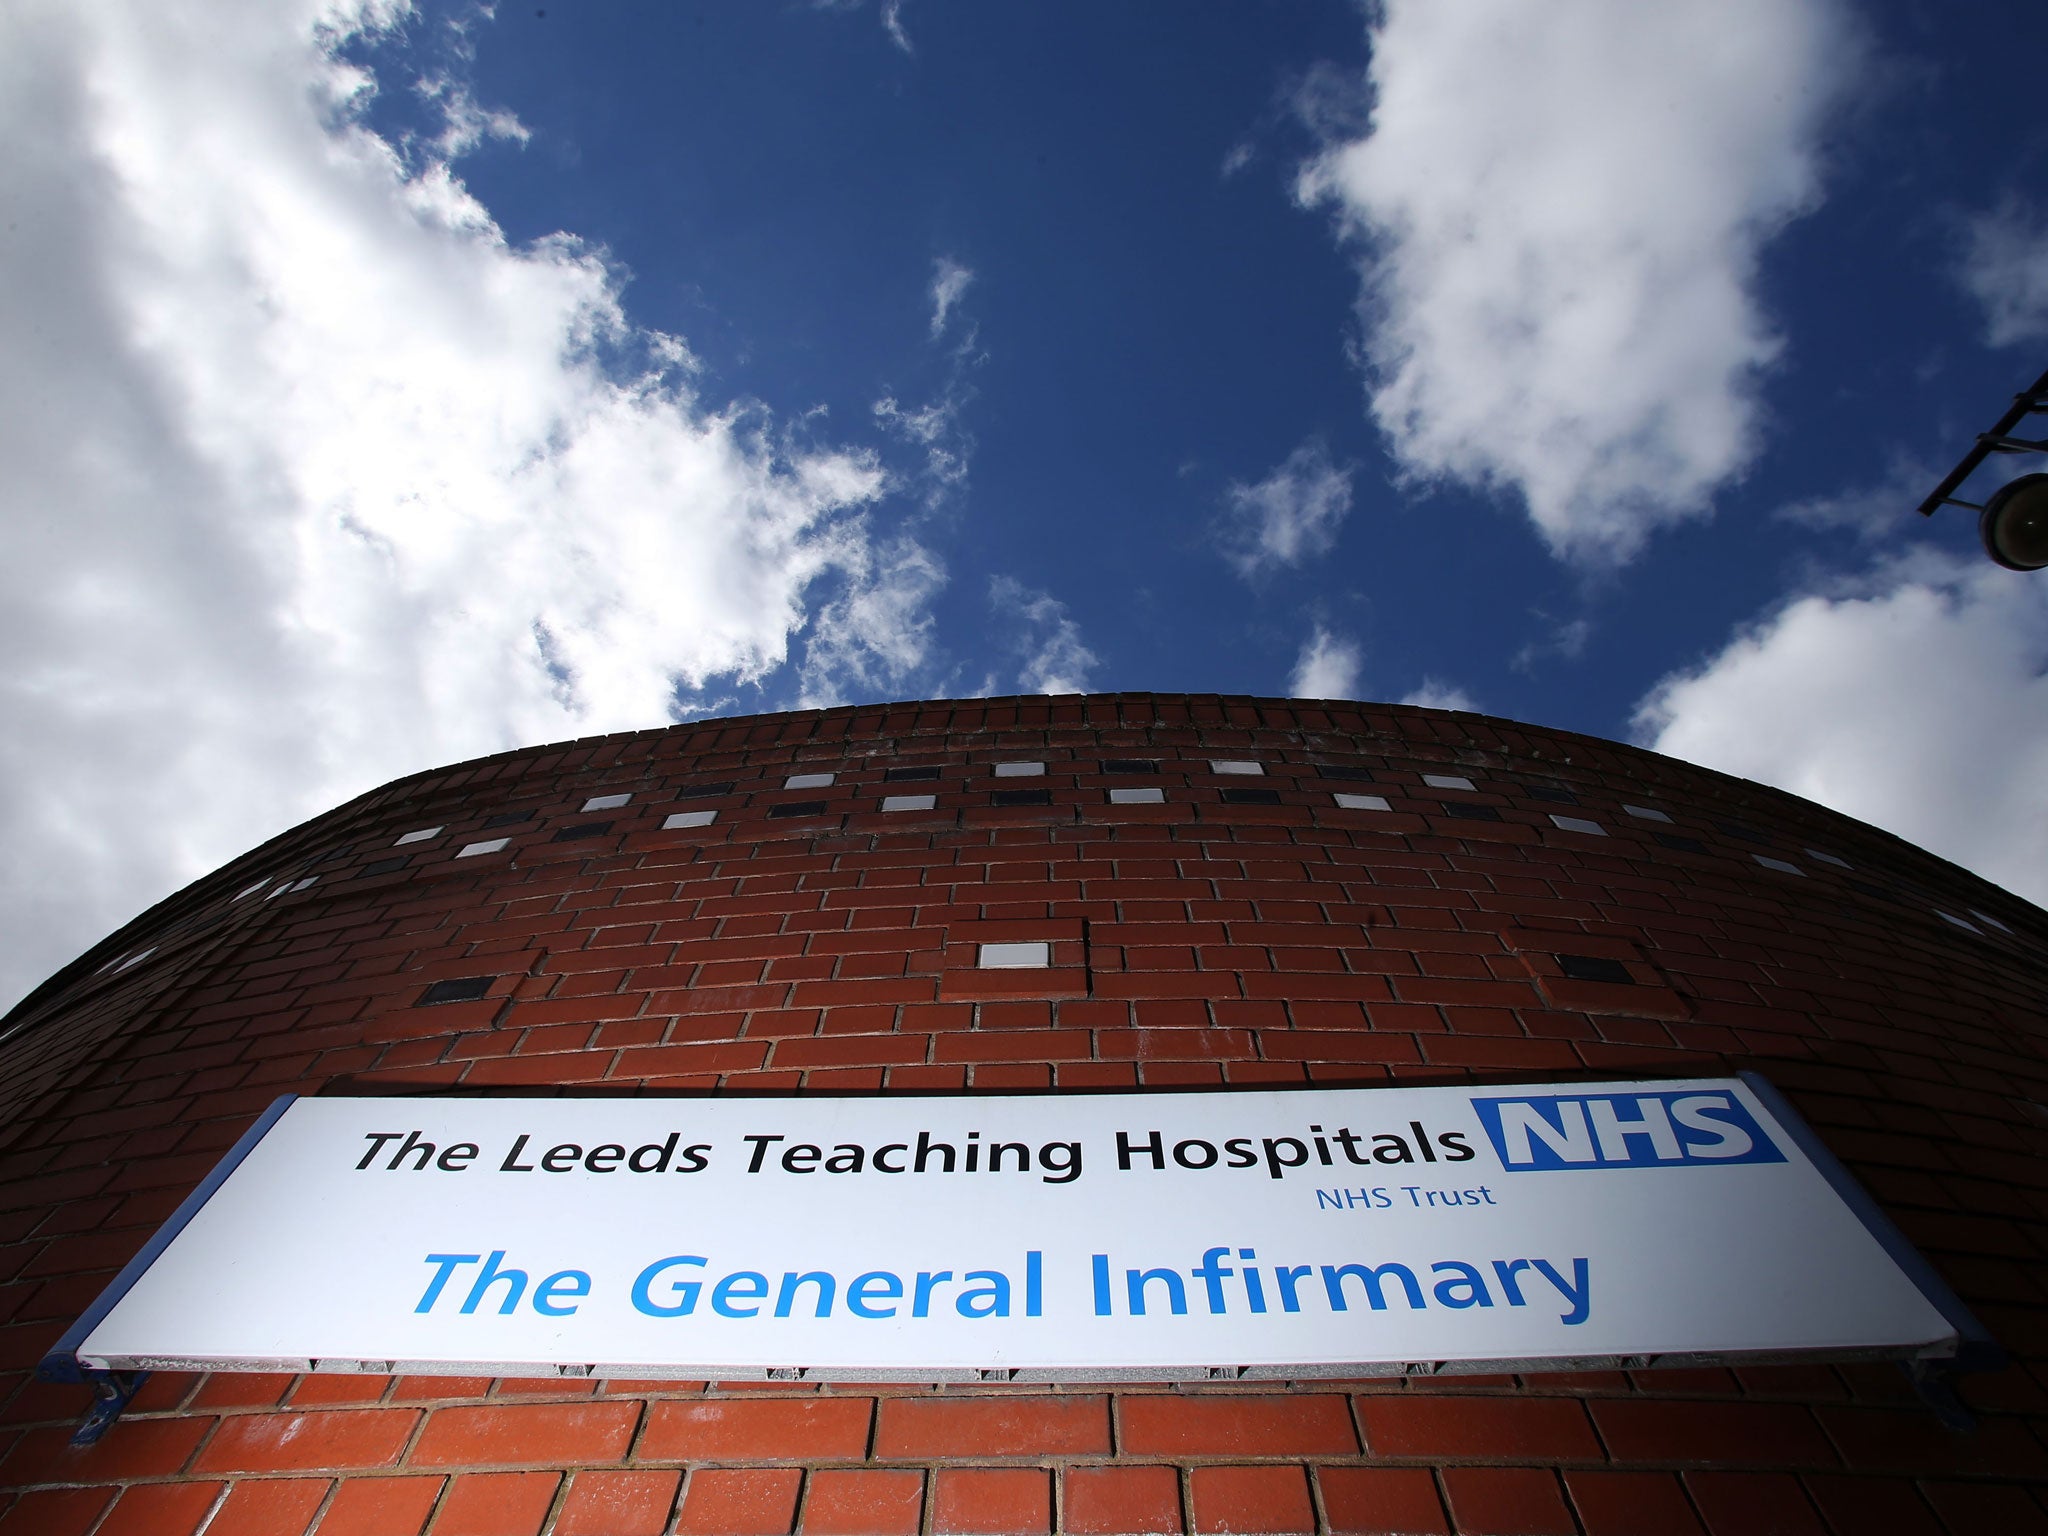 The Jubilee Wing of Leeds General Infirmary. The children's heart surgery centre that was temporarily closed last year due to fears over mortality rates is safe, according to a comprehensive review of its services